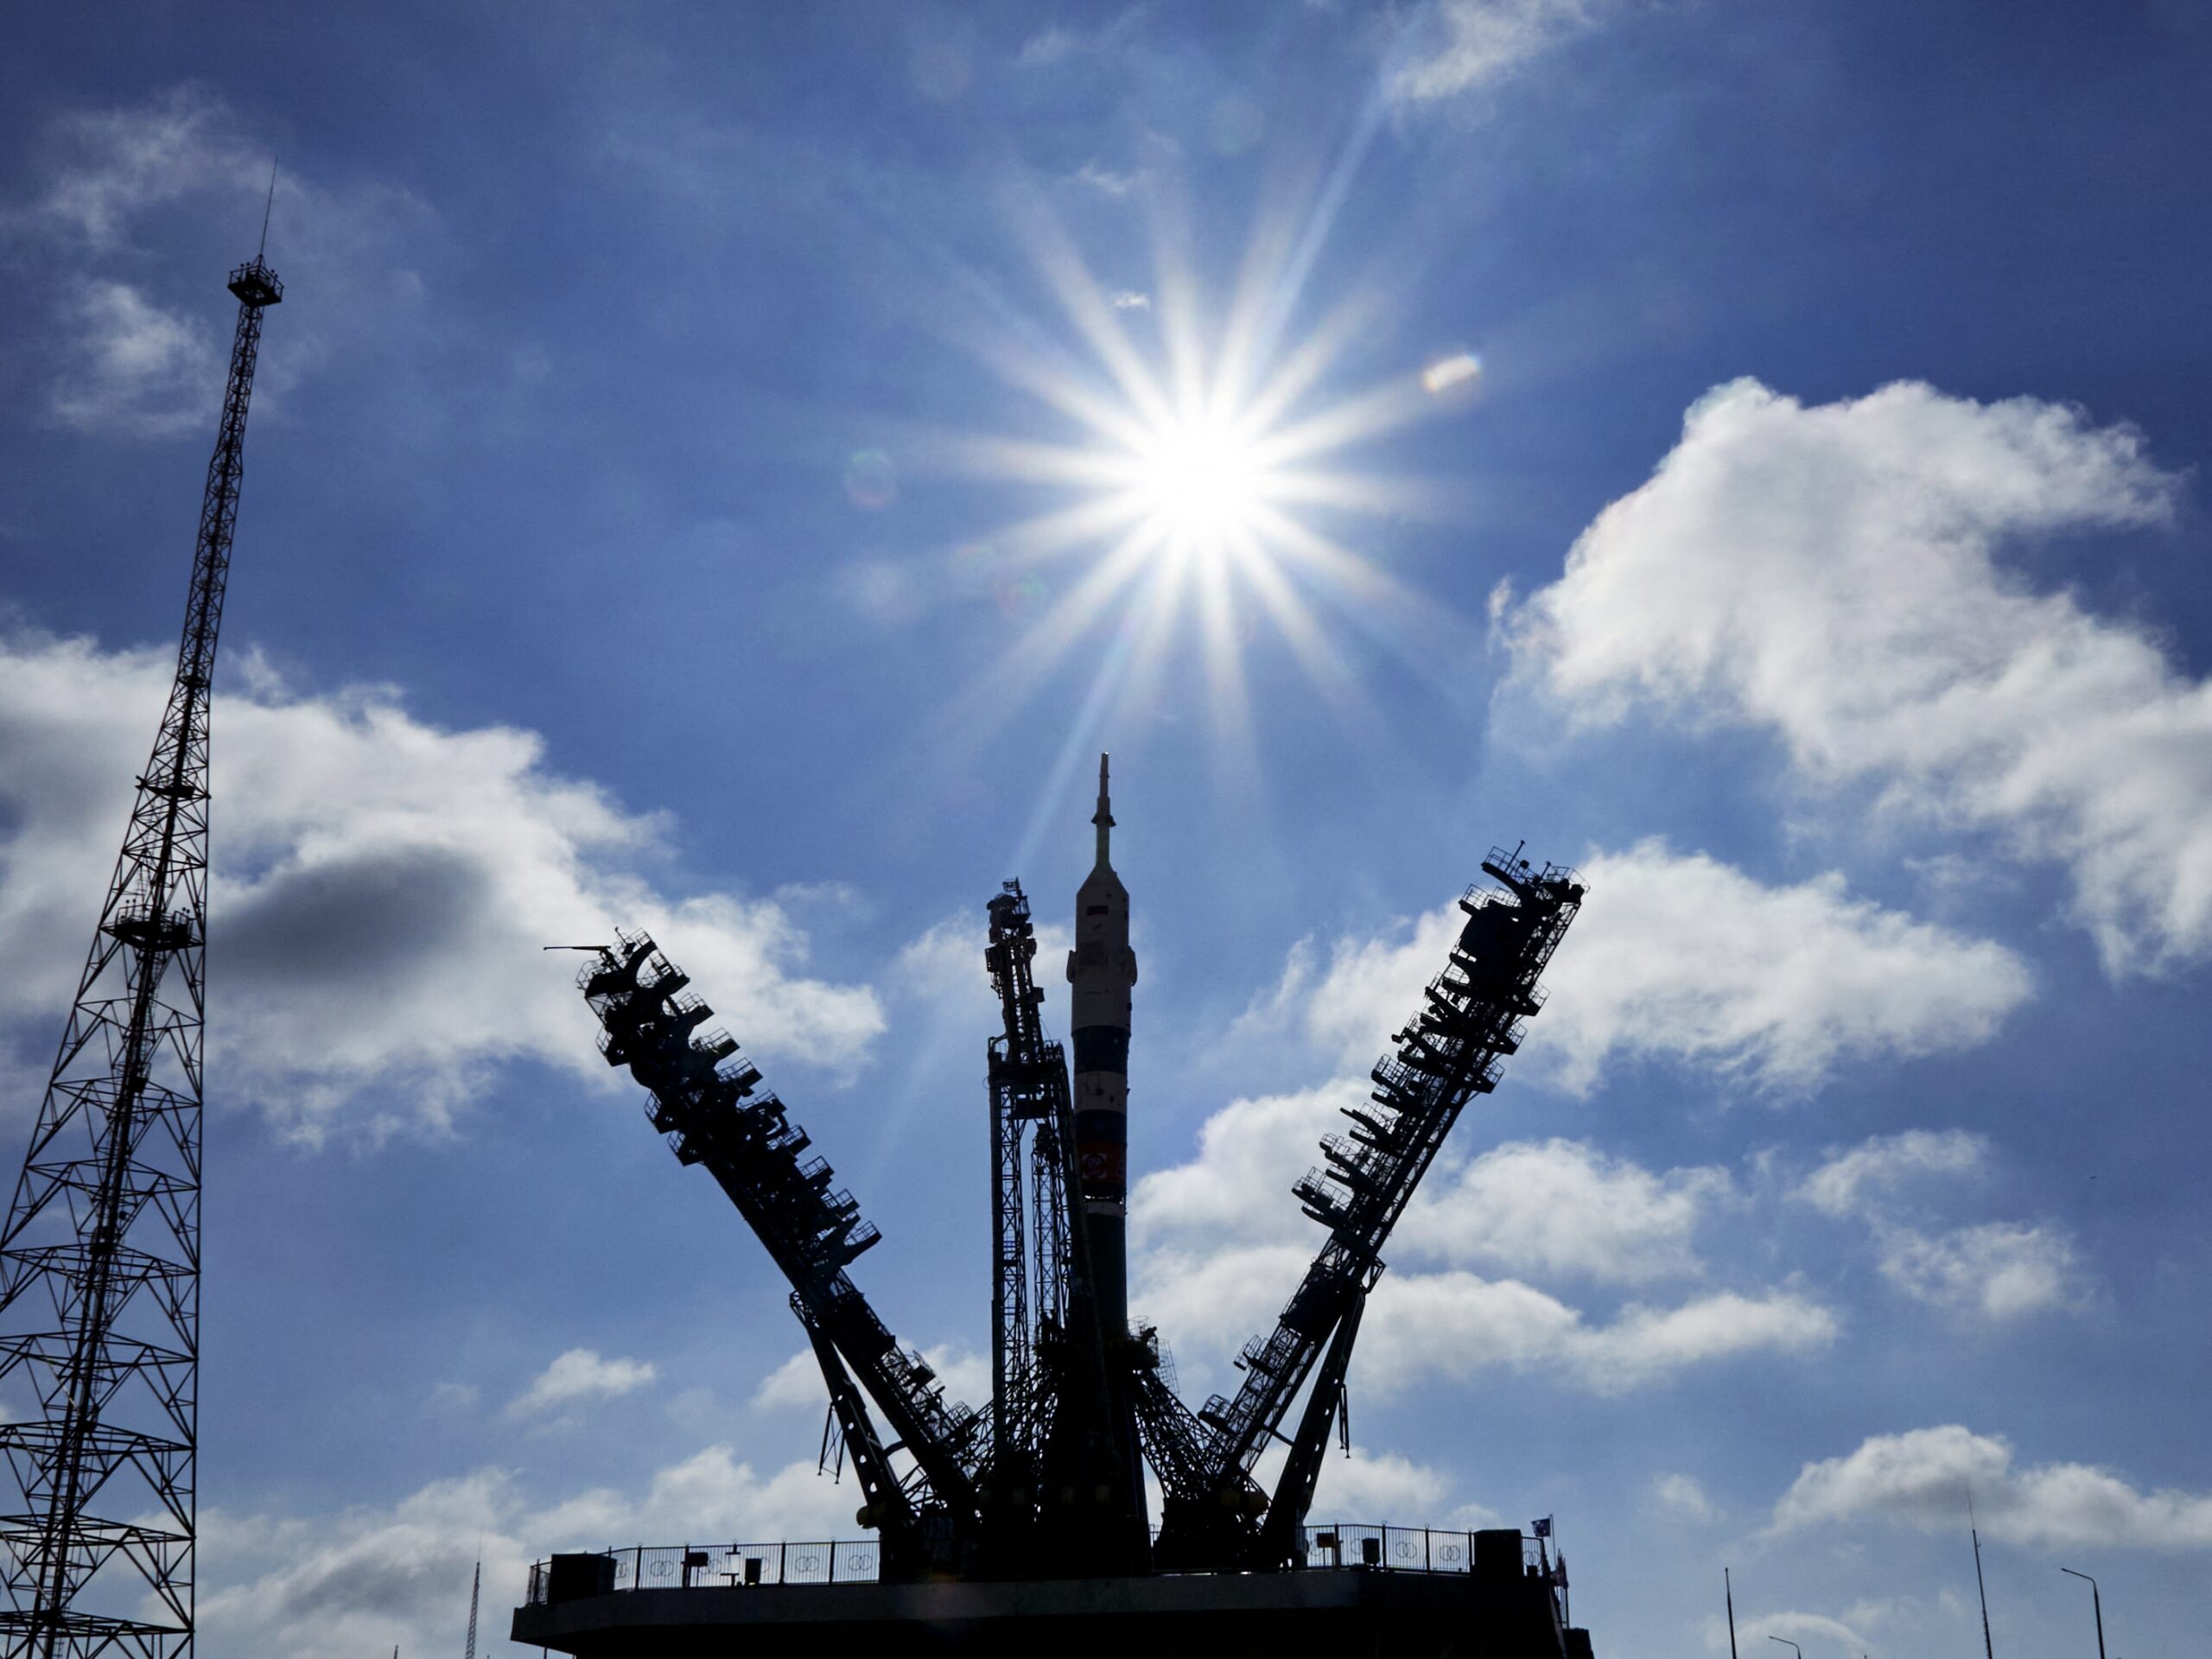 A recent Russian space launch placed a satellite onto the same orbital plane as a U.S. satellite, the Pentagon says. Here, a Soyuz-2.1a rocket booster with the Soyuz MS-24 spacecraft sits at the launch pad at the Russian-leased Baikonur cosmodrome in Kazakhstan last September.